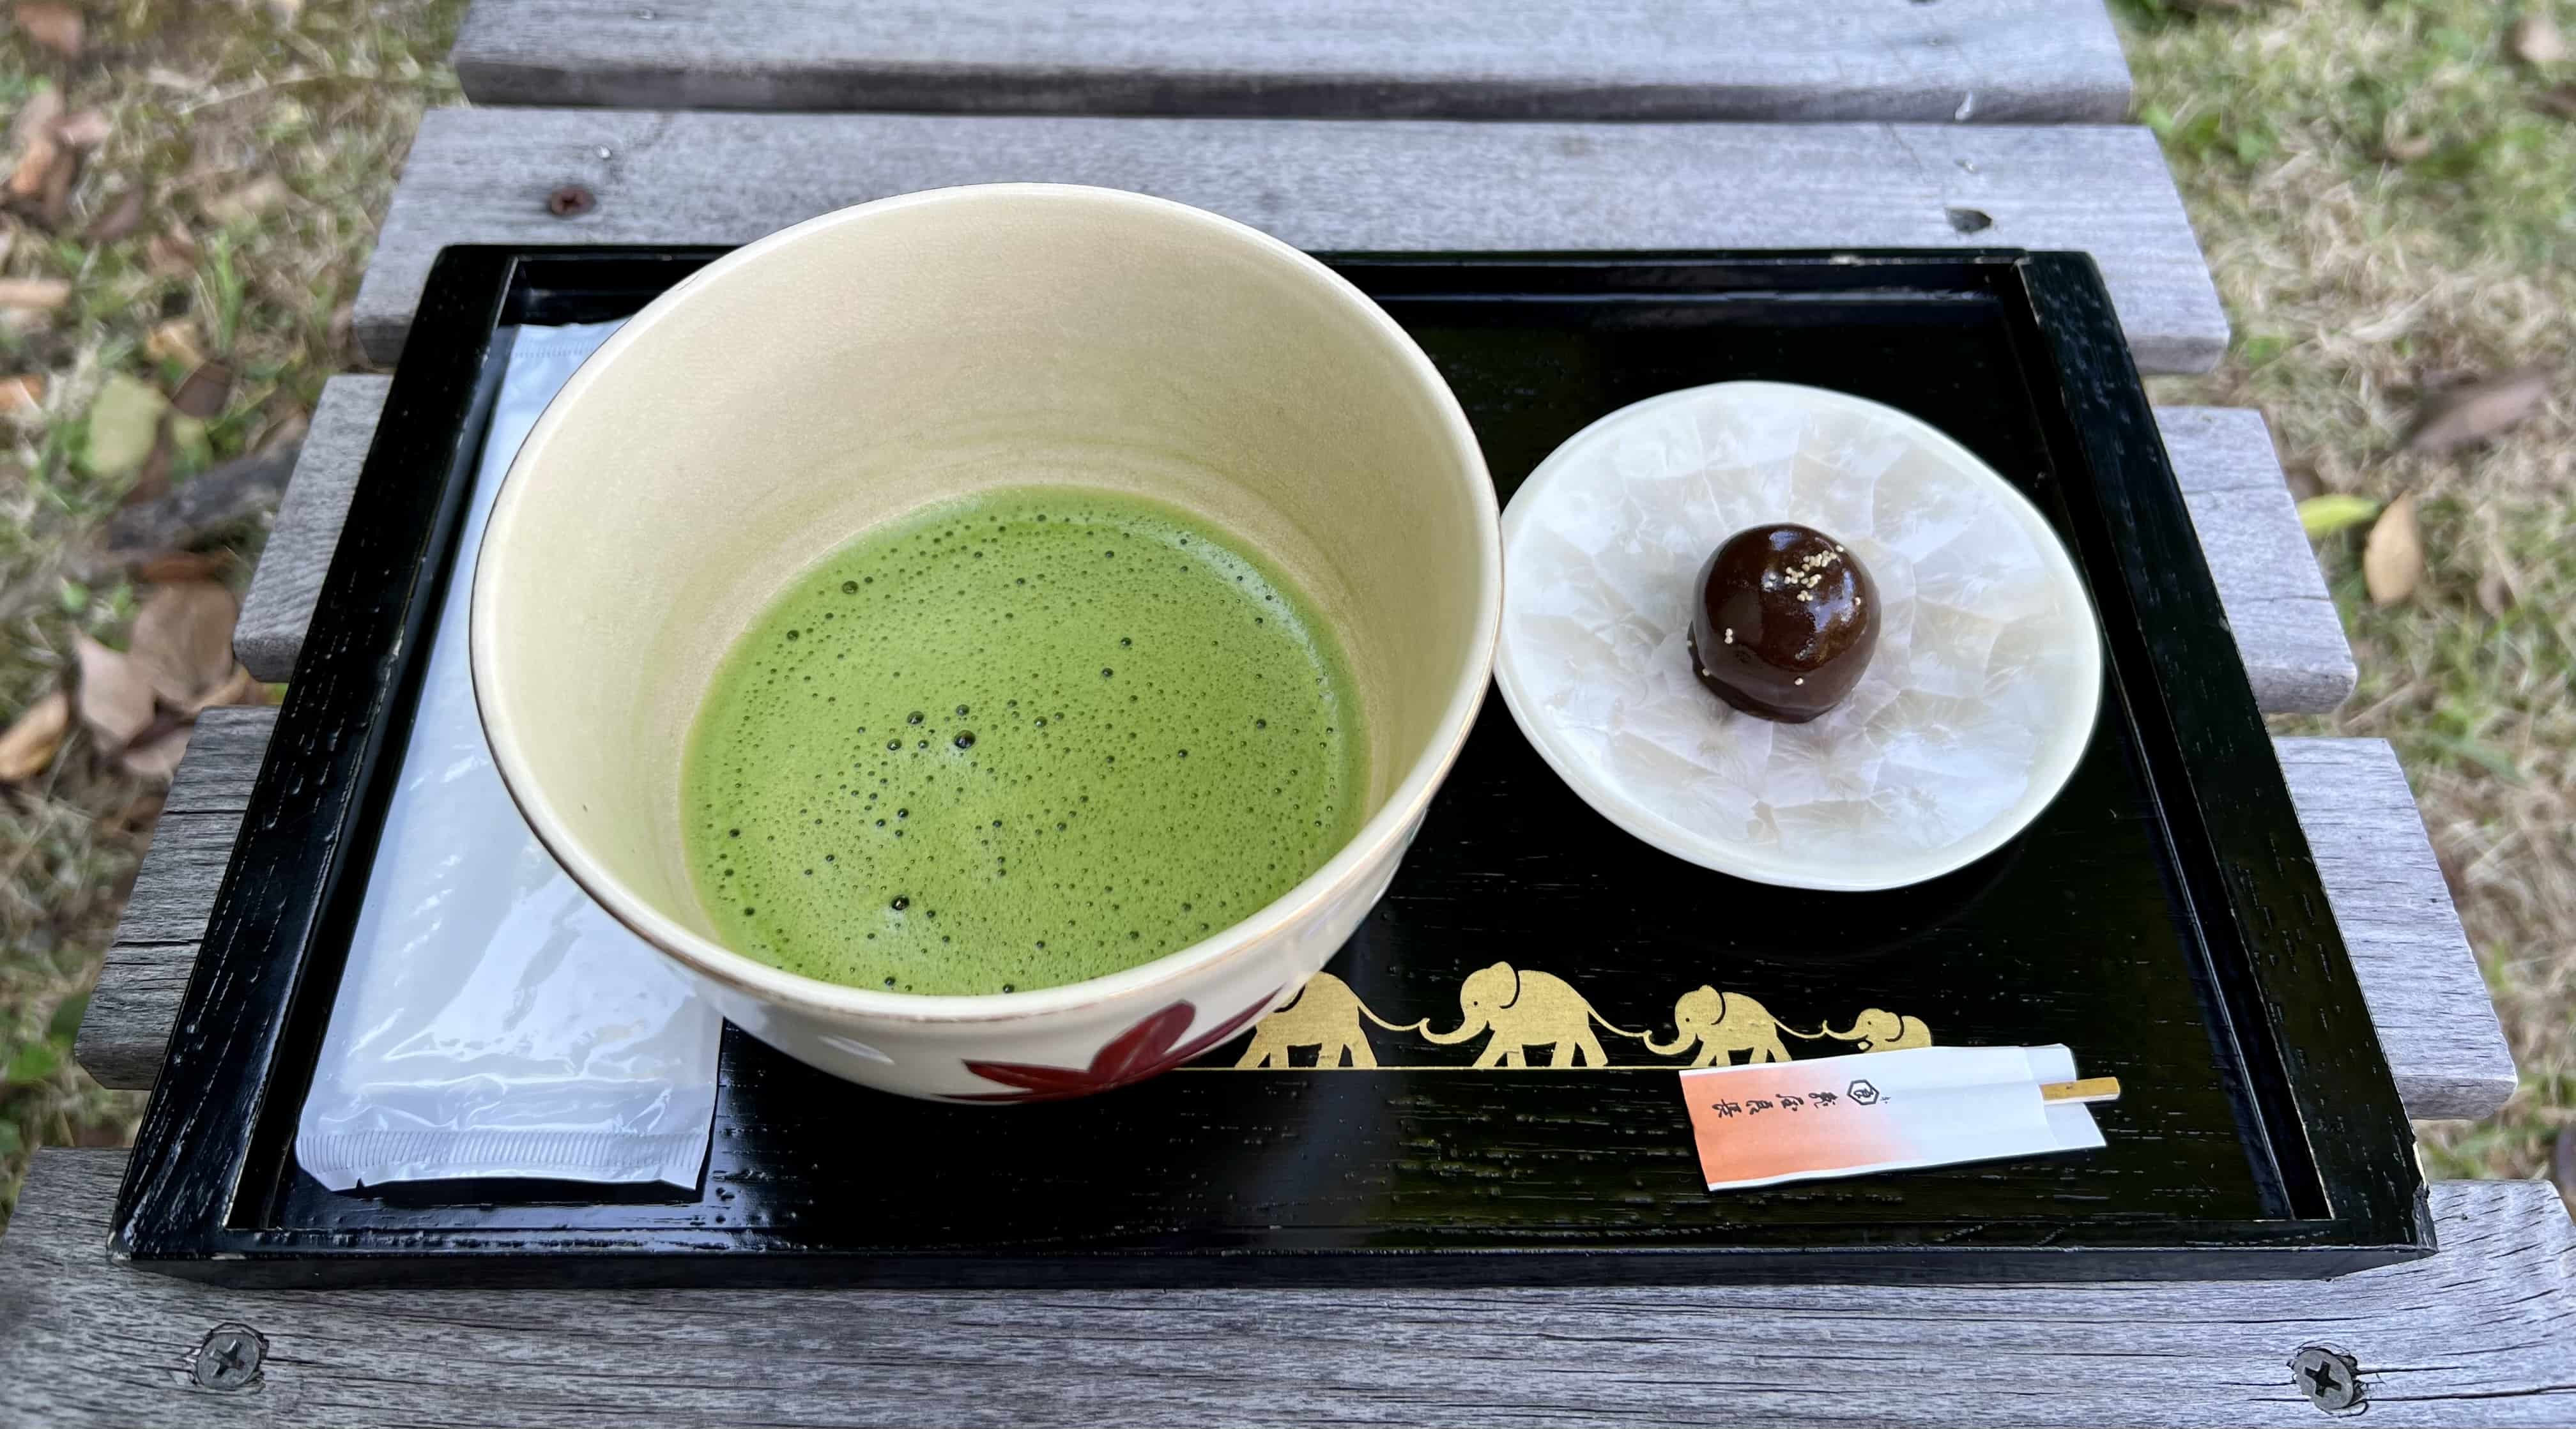 Small gold-flaked wagashi served with matcha tea.